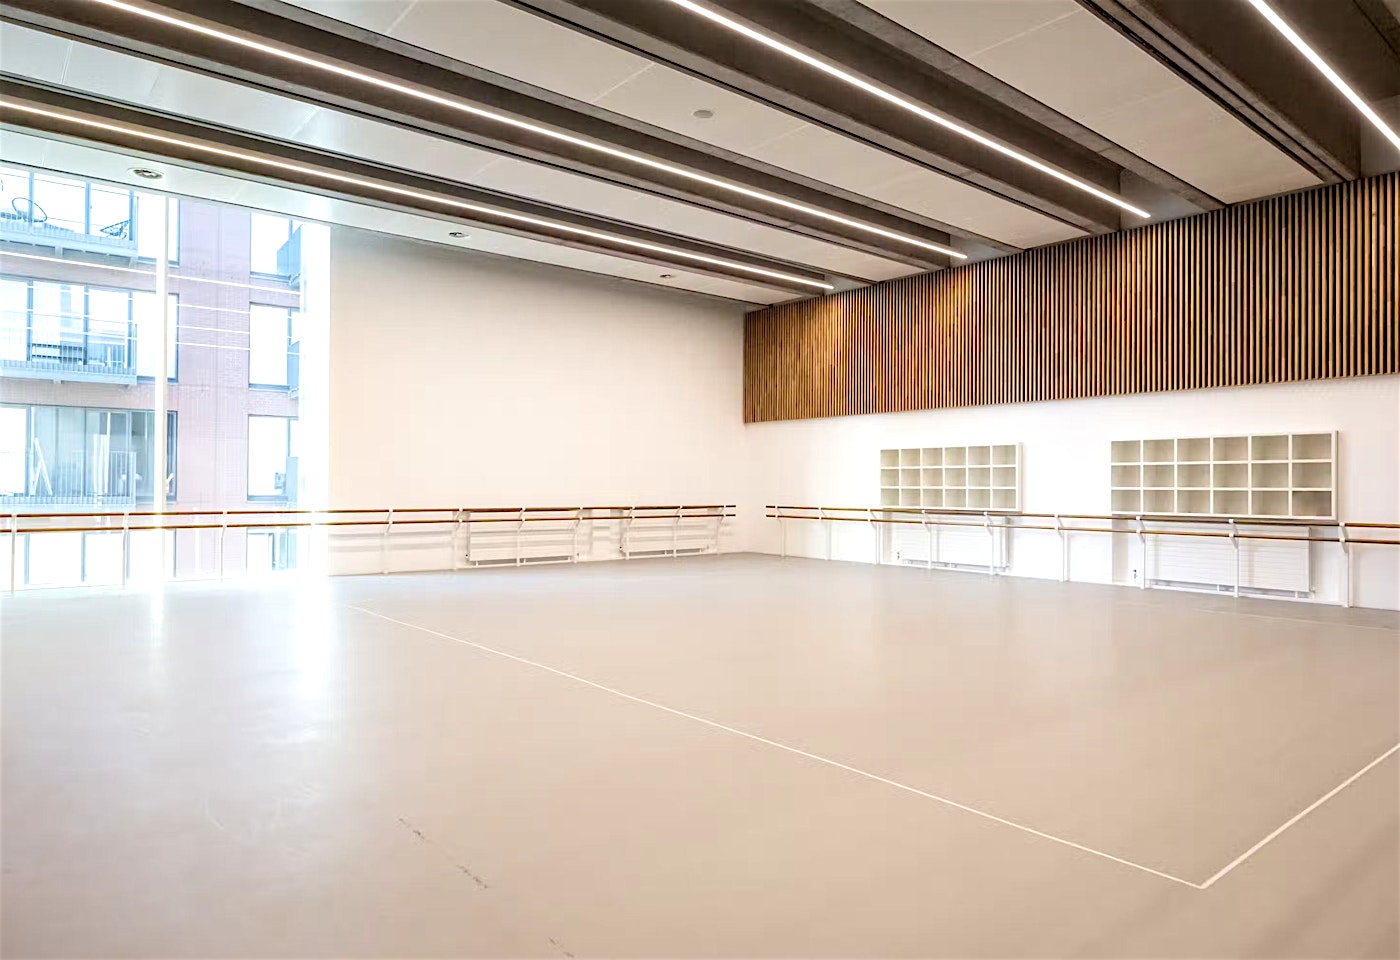 The rehearsal room at English National Ballet, east London